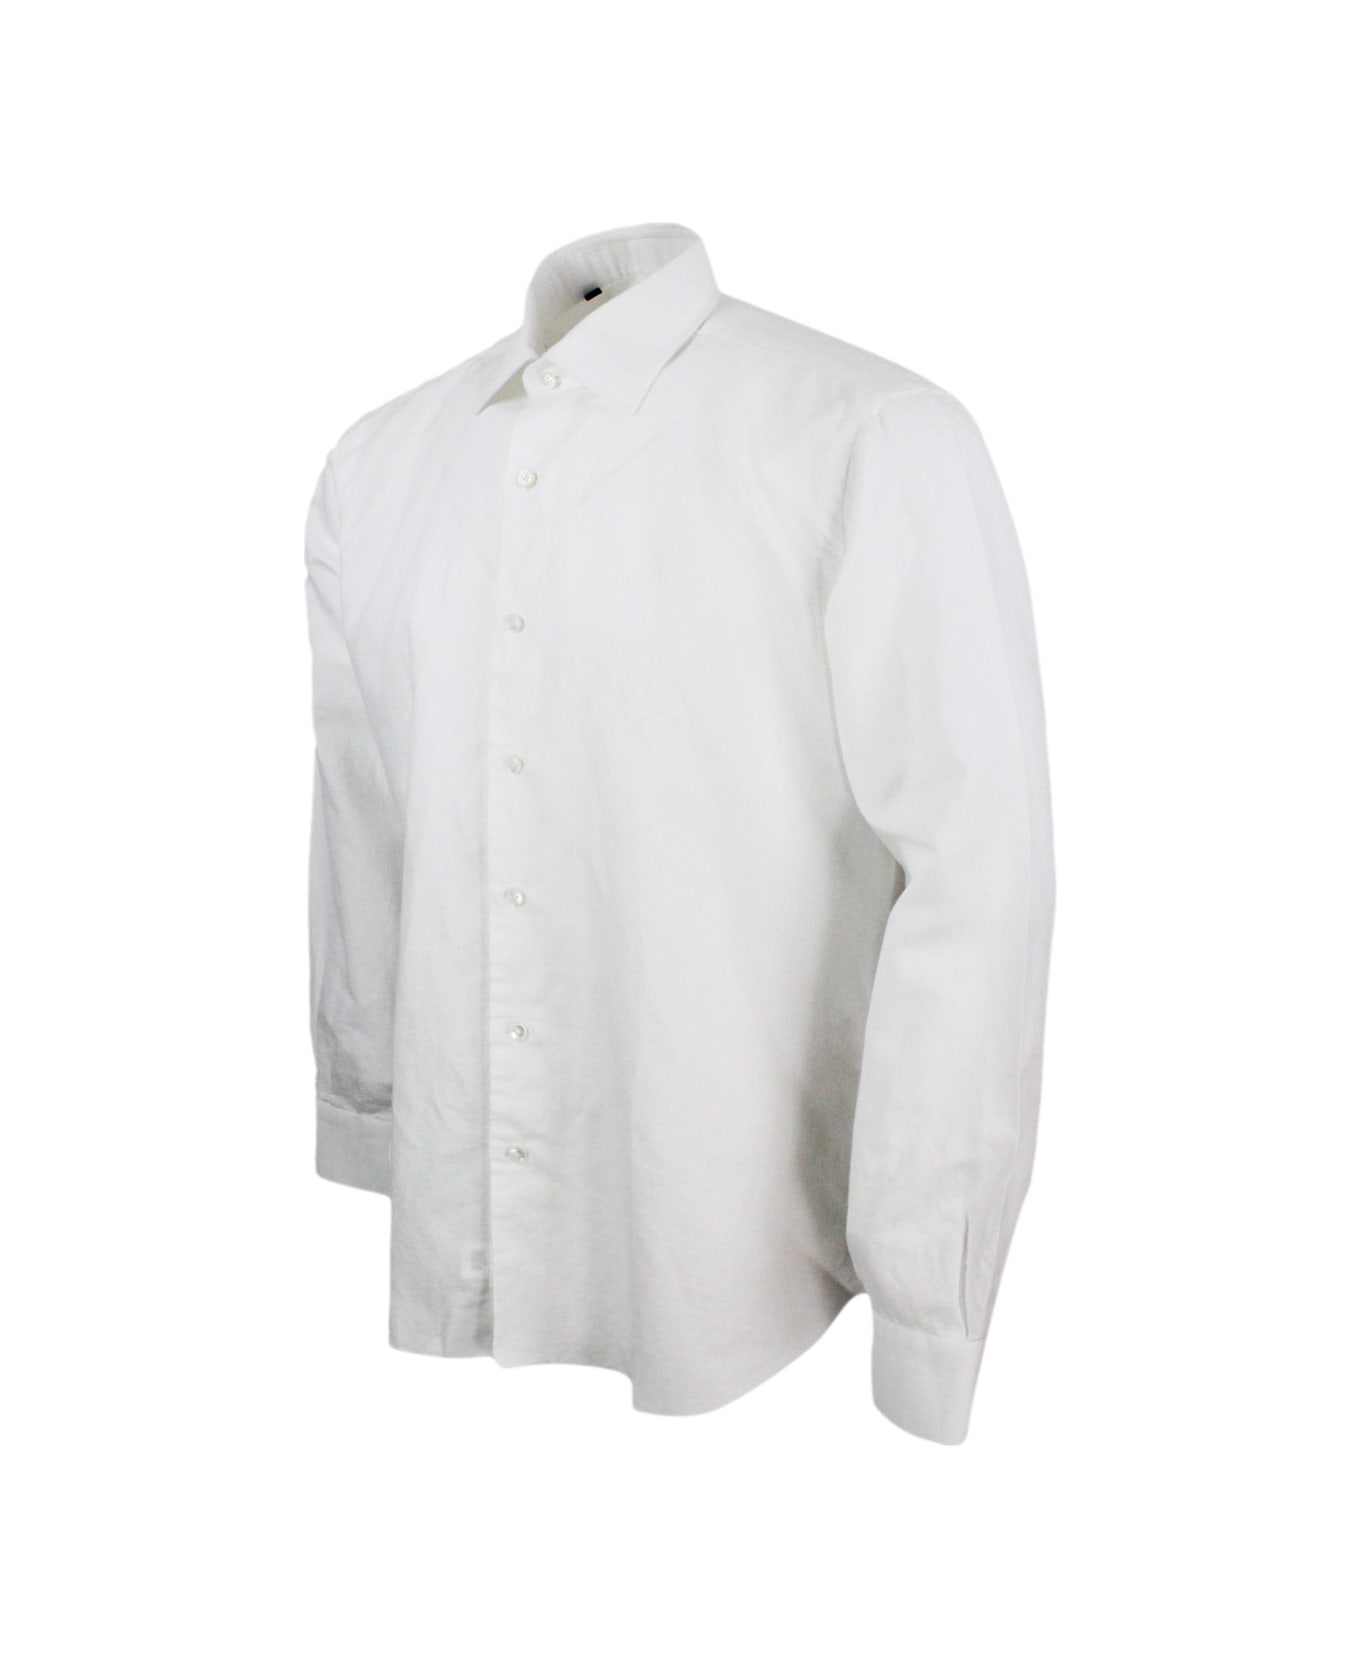 Barba Napoli Cult Shirt In Fine Cotton And Linen With Italian Collar And Hand-sewn With Mother-of-pearl Buttons - White シャツ